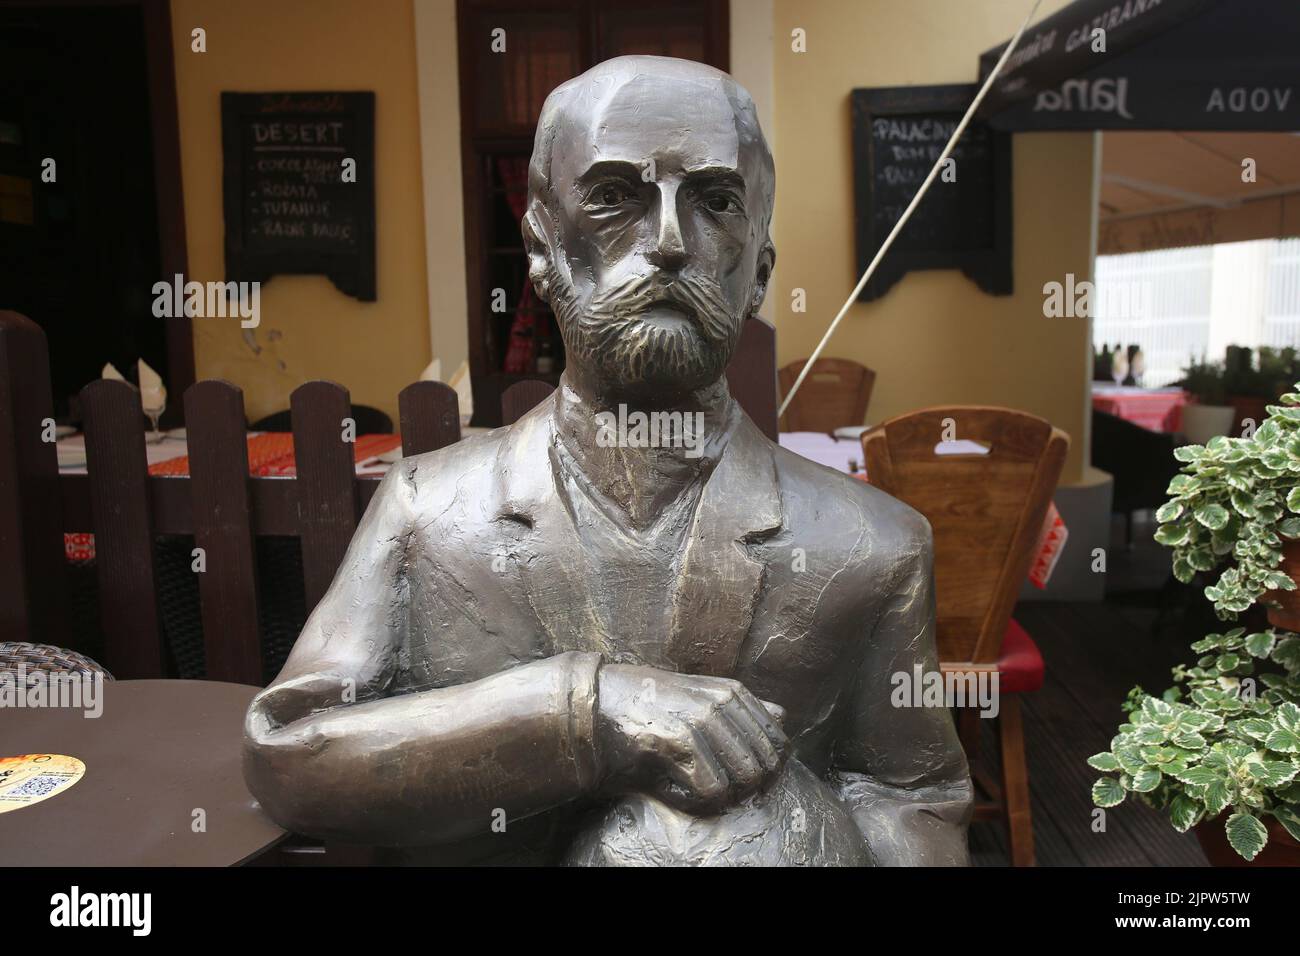 Statue of Andrija Mohorovicic a famous Croatian scientists is seen as part of Sit&Meet project in Zagreb, Croatia on August 20, 2022. Photo: Lovro Domitrovic/PIXSELL Stock Photo